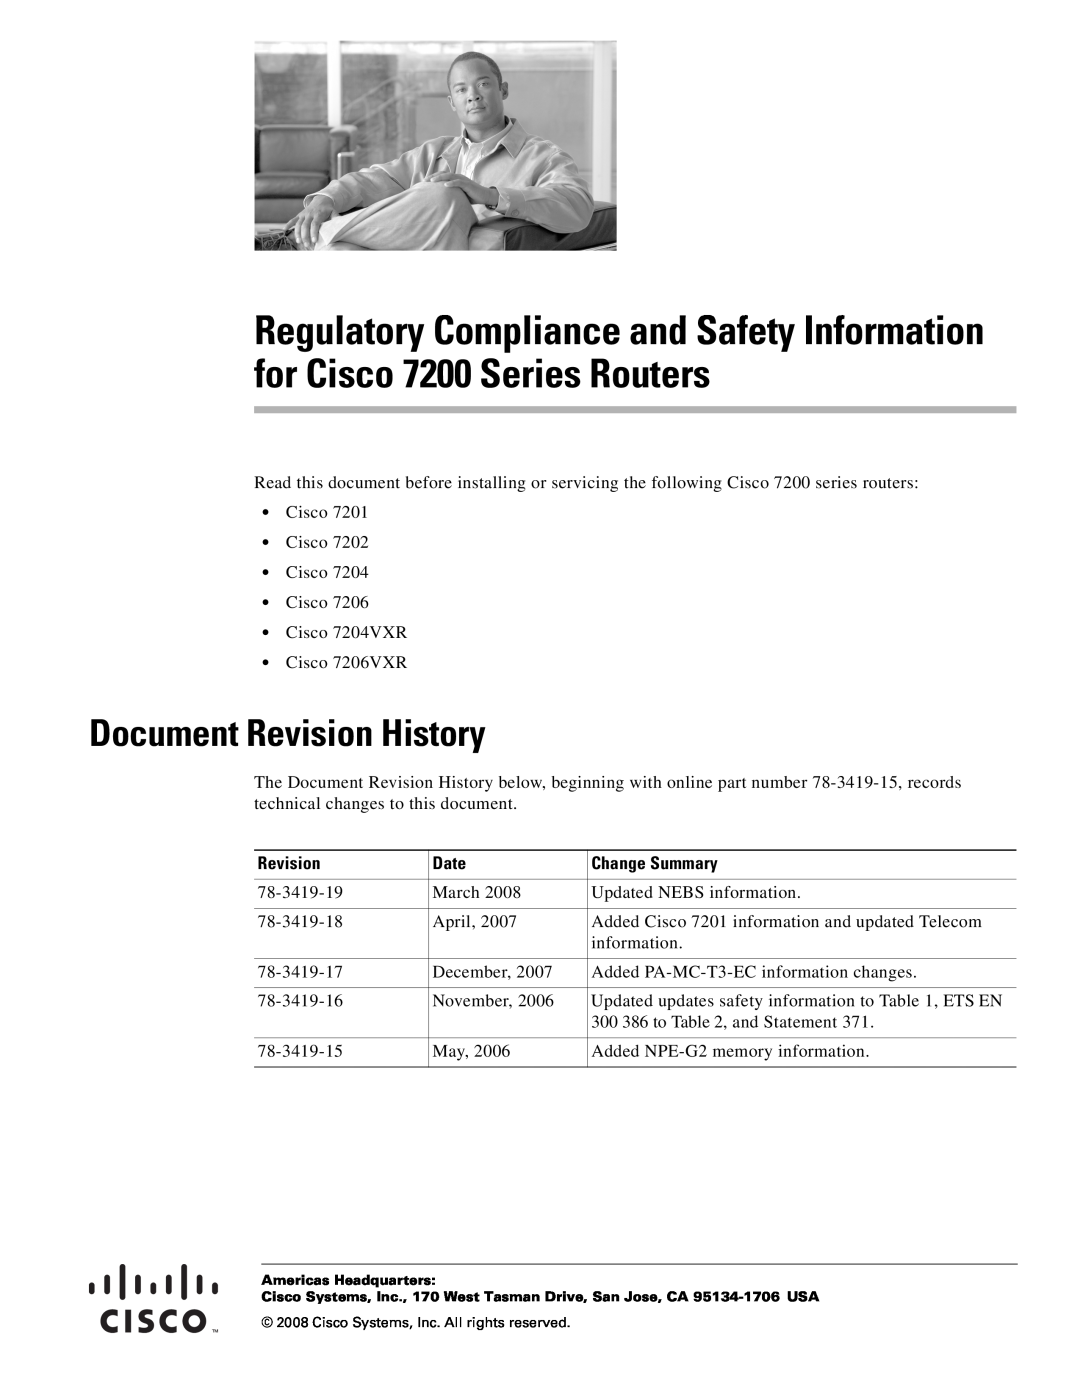 Cisco Systems 7200 Series, 7206 VXR, 7204 VXR, 7202 manual Document Revision History, Date, Change Summary 